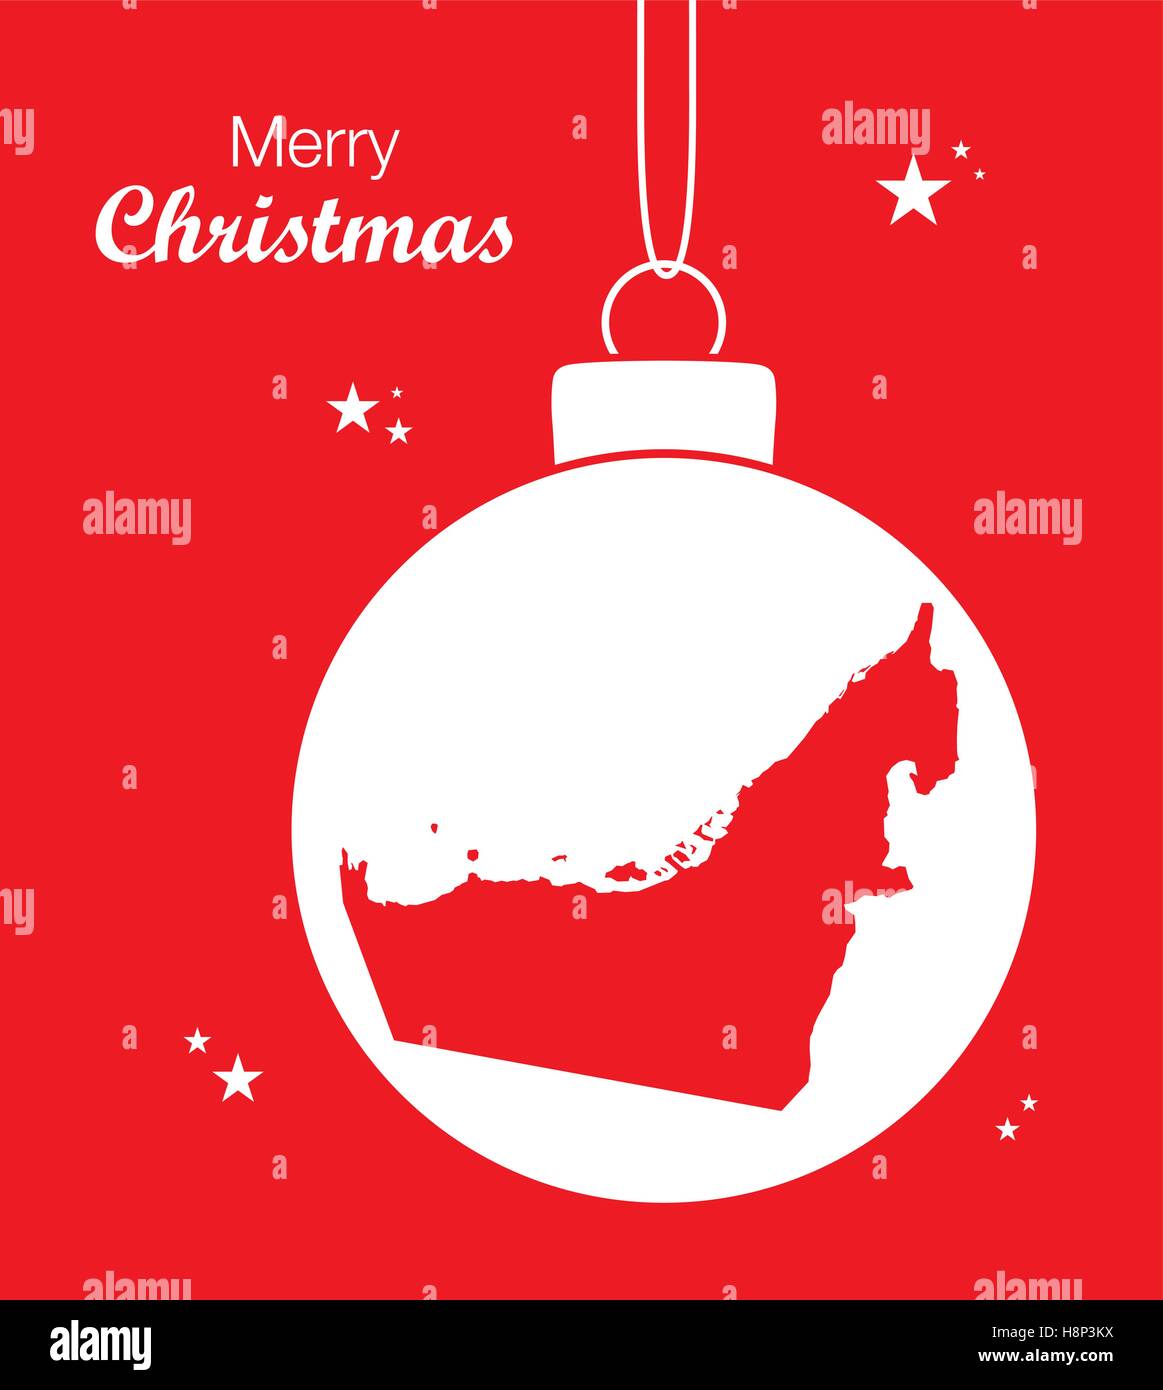 Merry Christmas illustration theme with map of the United Arab Emirates Stock Vector